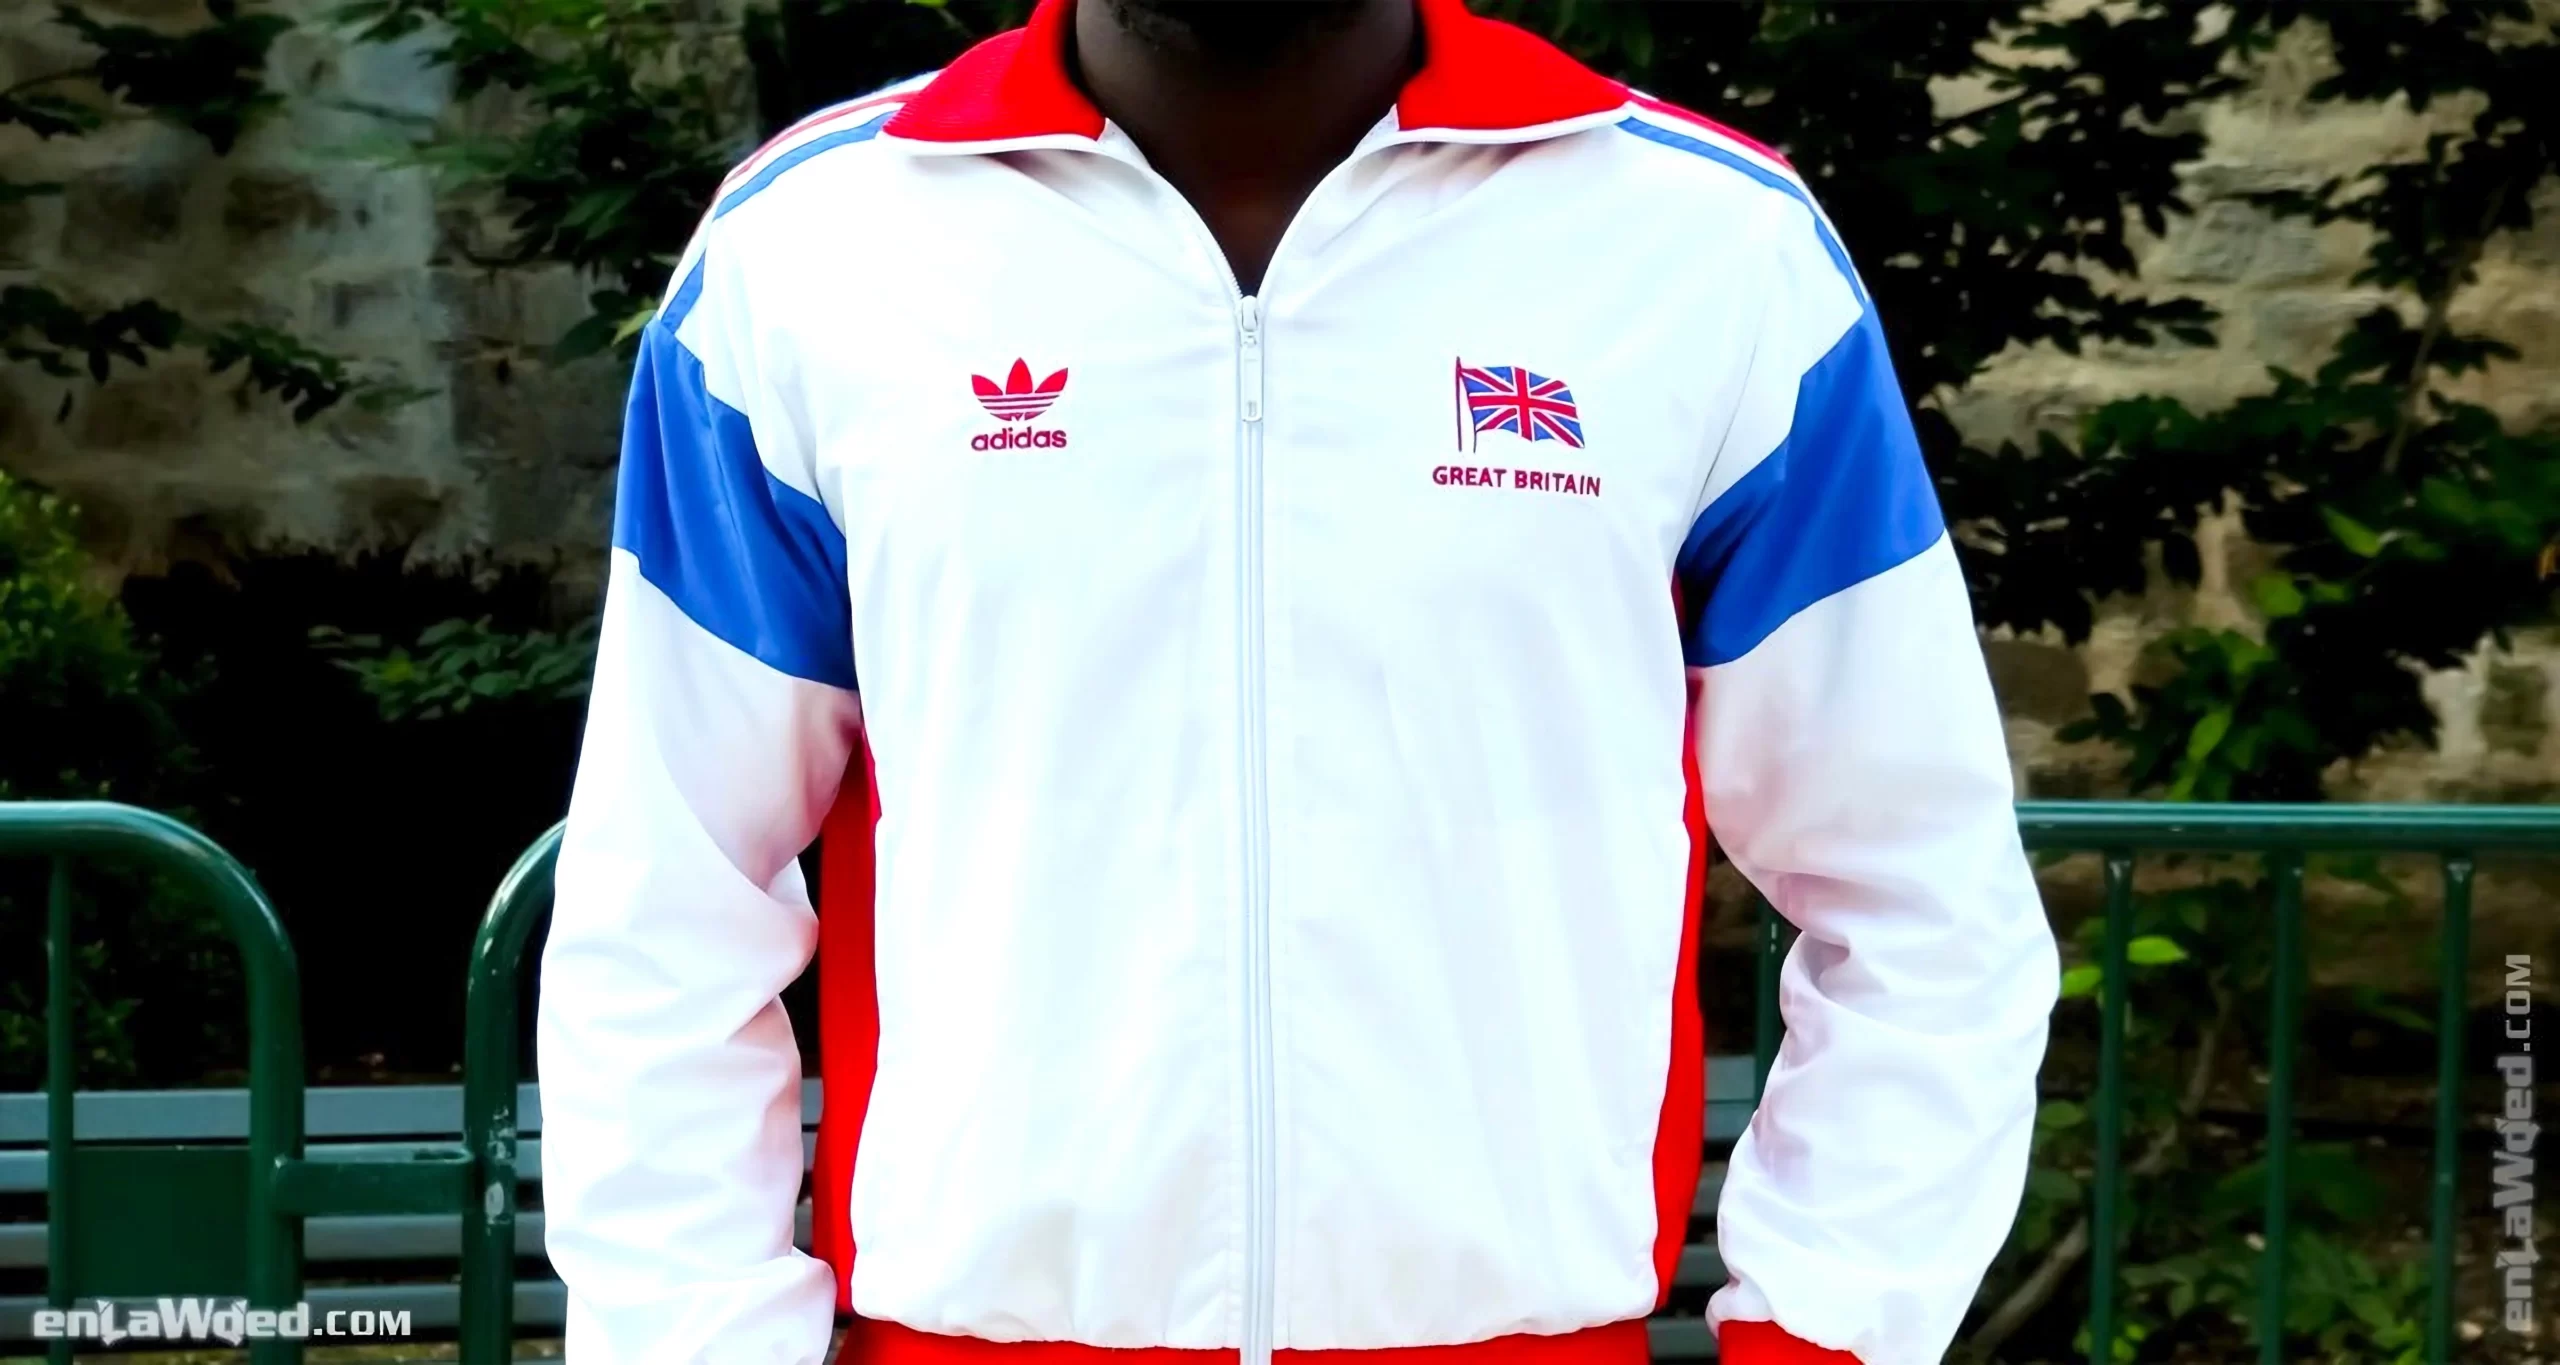 Men’s 2005 Great Britain Olympic ’84 TT by Adidas: Supported (EnLawded.com file #lmcen9sqbsx13r4egb)